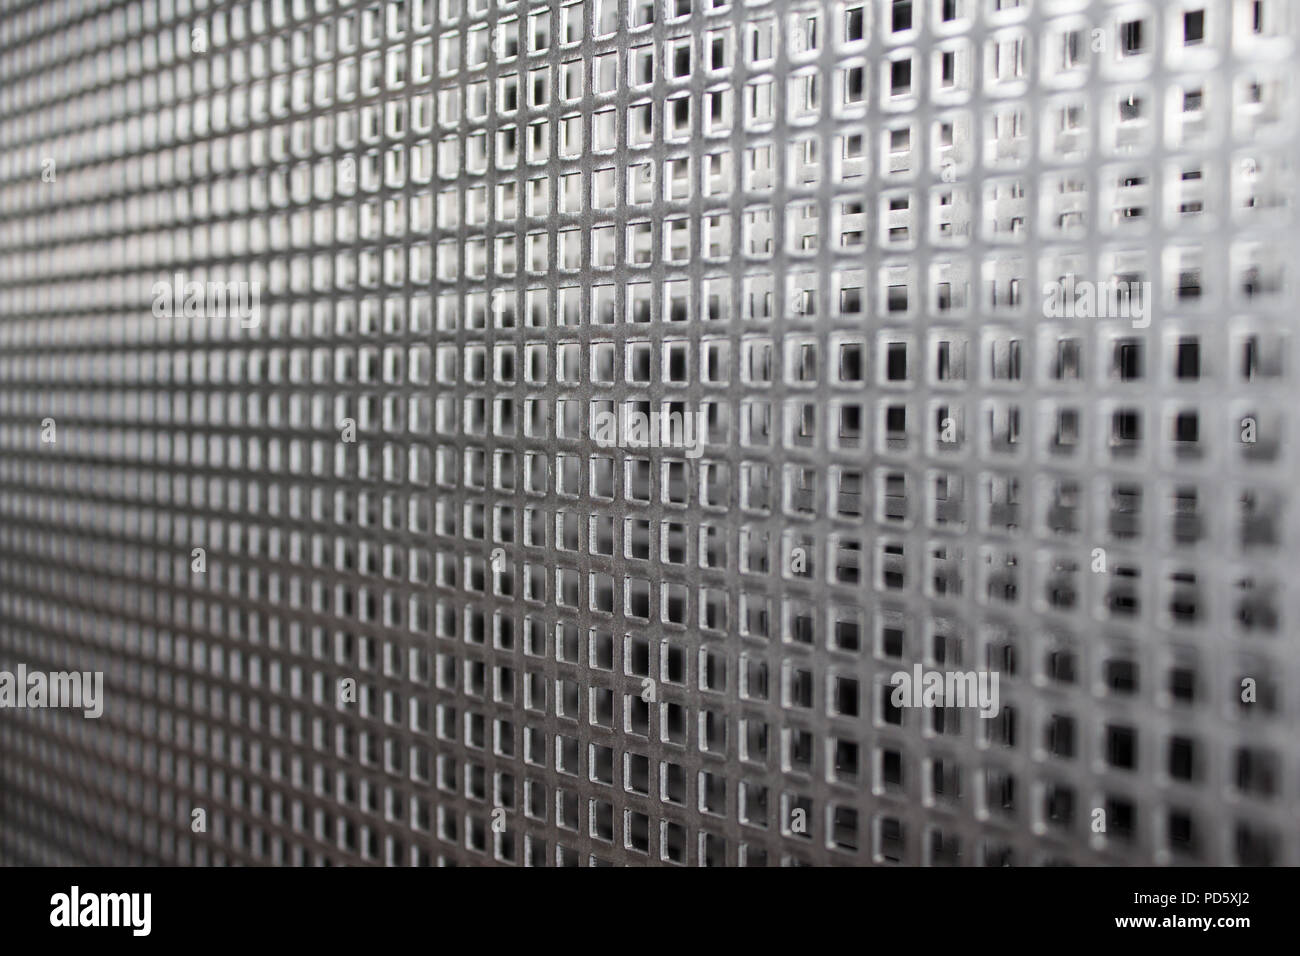 Perforated metal plate iron steel sheets with gridded wholes pattern for industrial processing Stock Photo